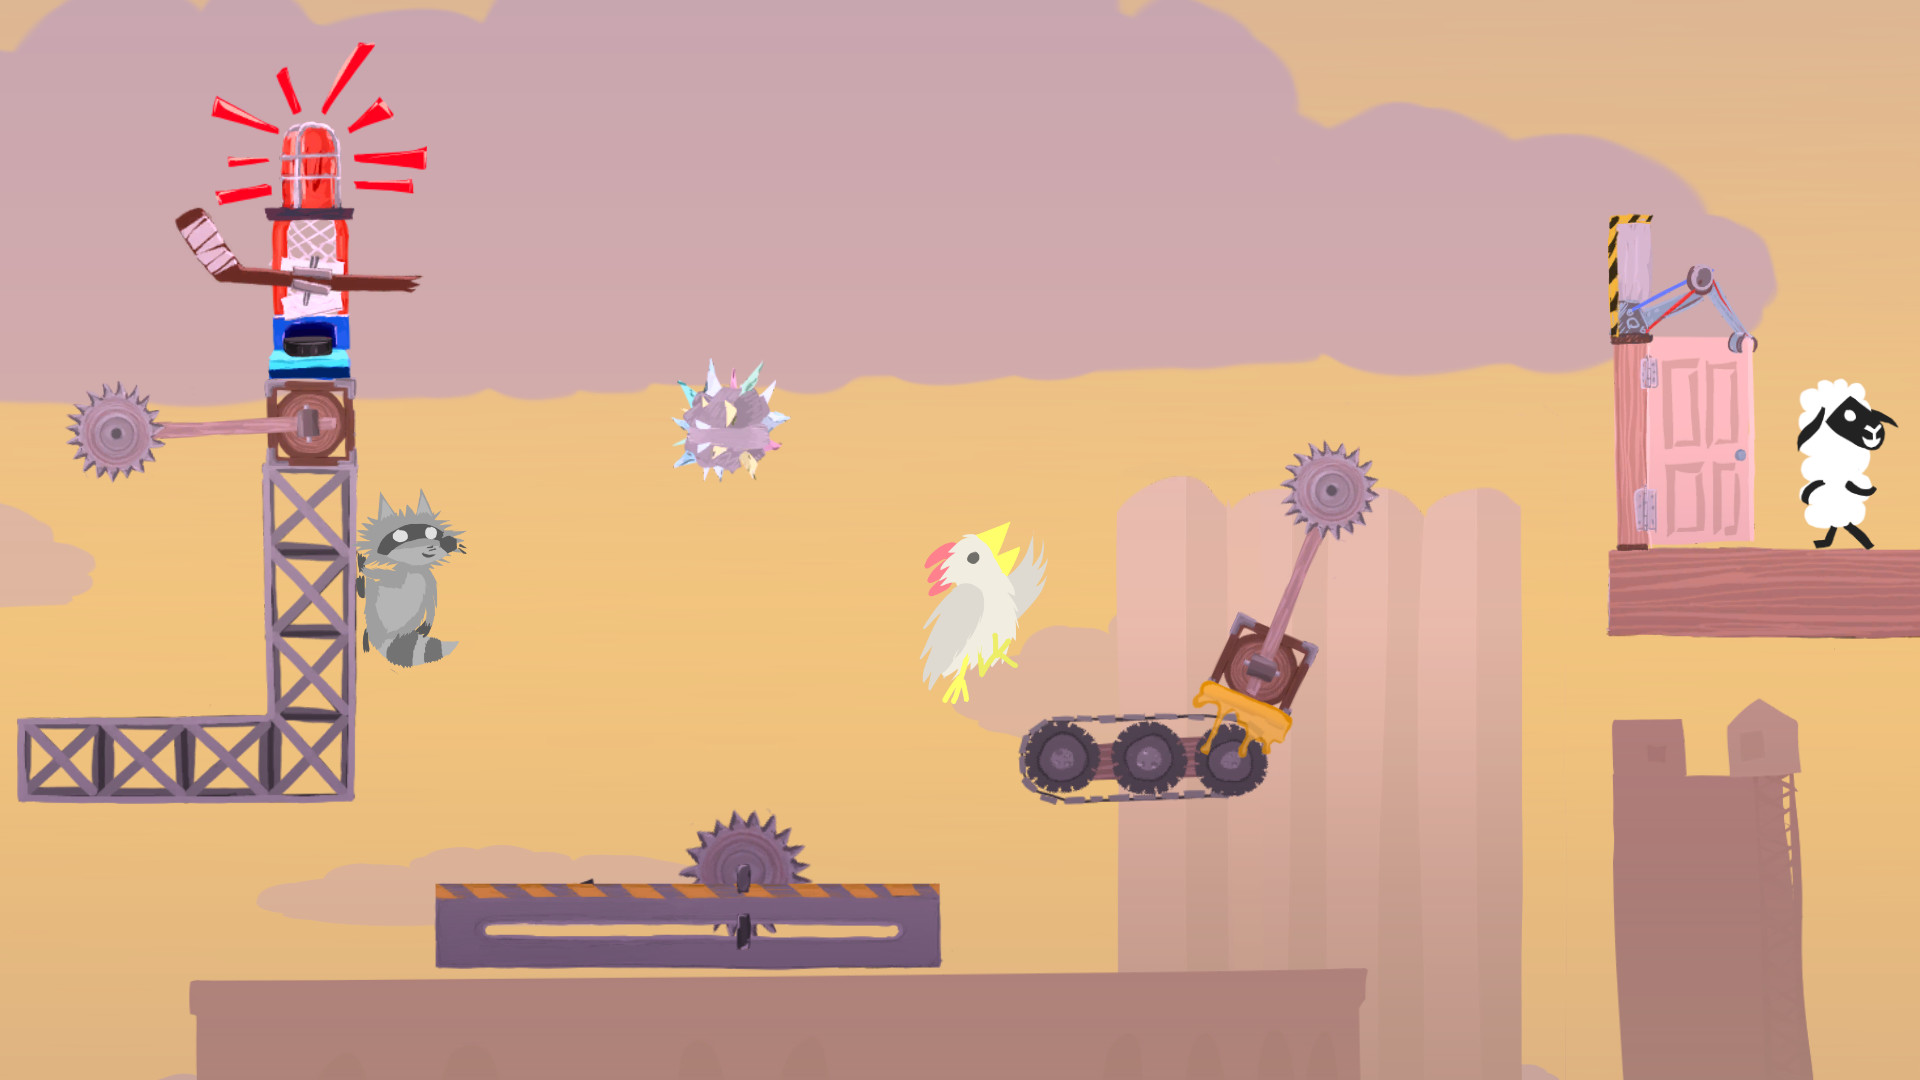 Ultimate chicken horse skidrow game